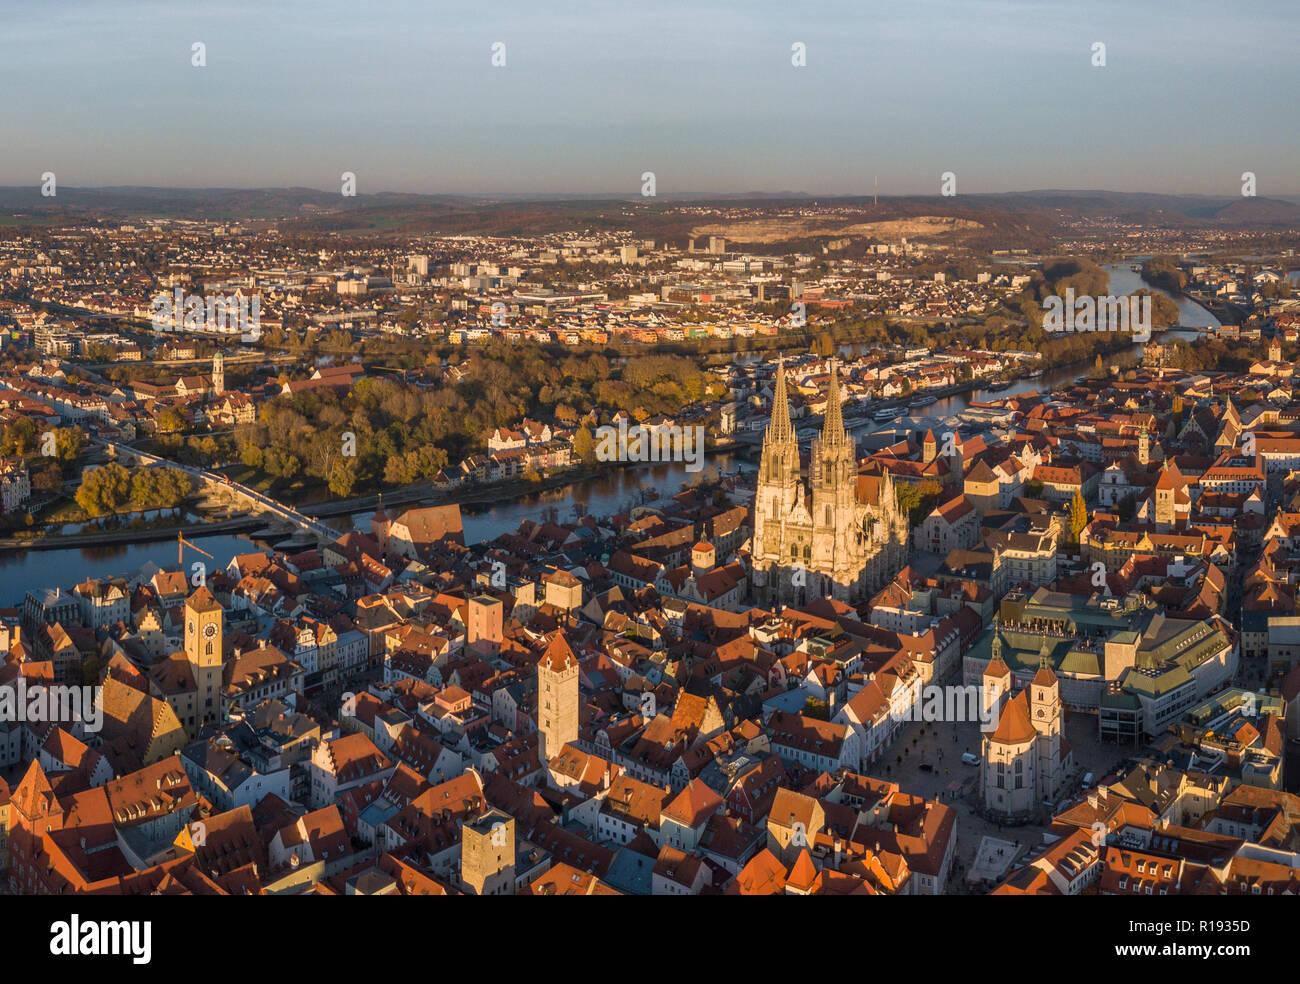 Aerial view of the medieval center of Regensburg Stock Photo